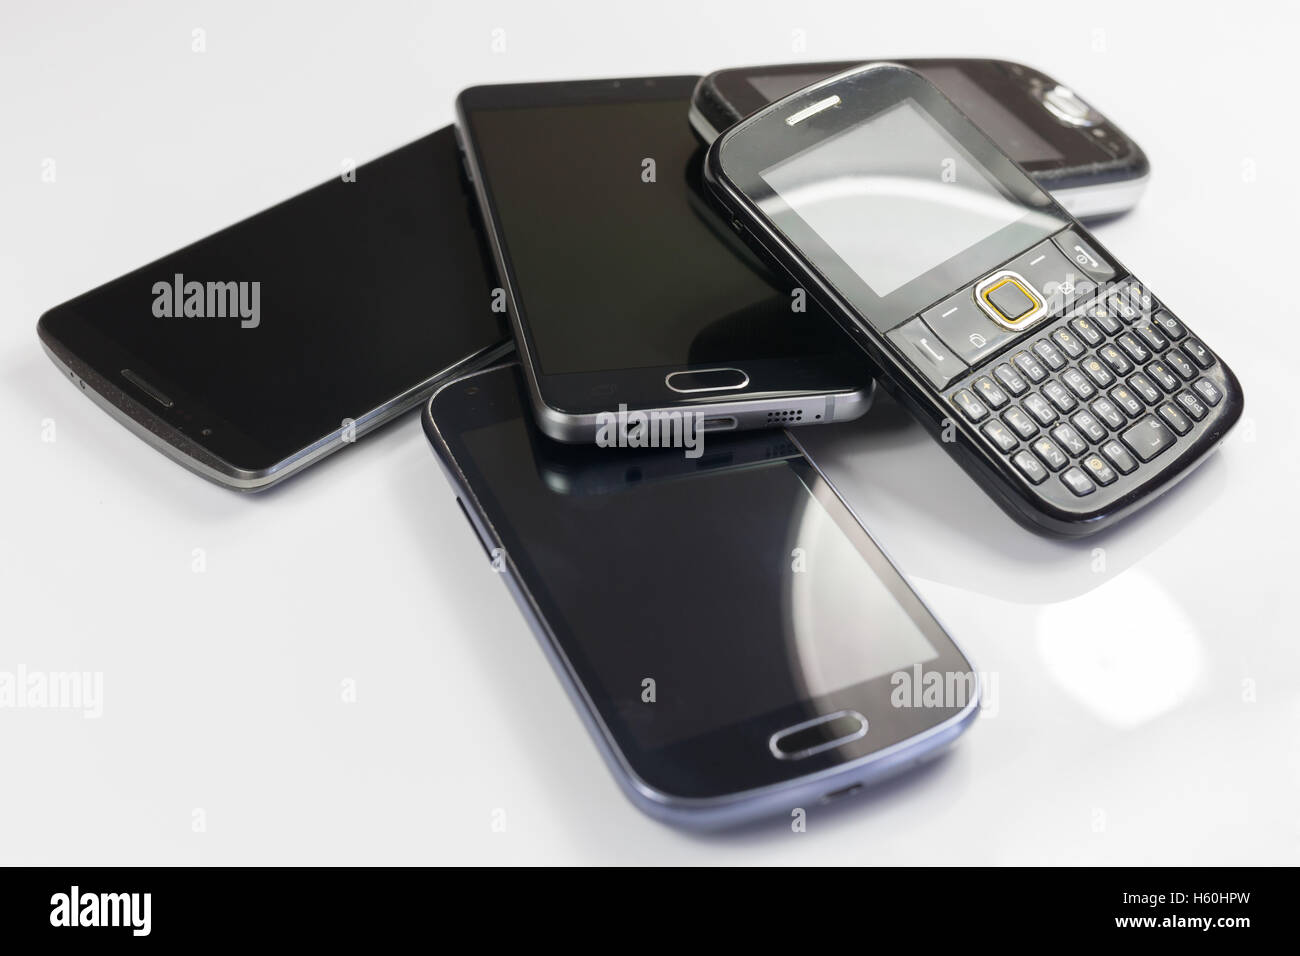 Pile of new and old mobile phones Stock Photo